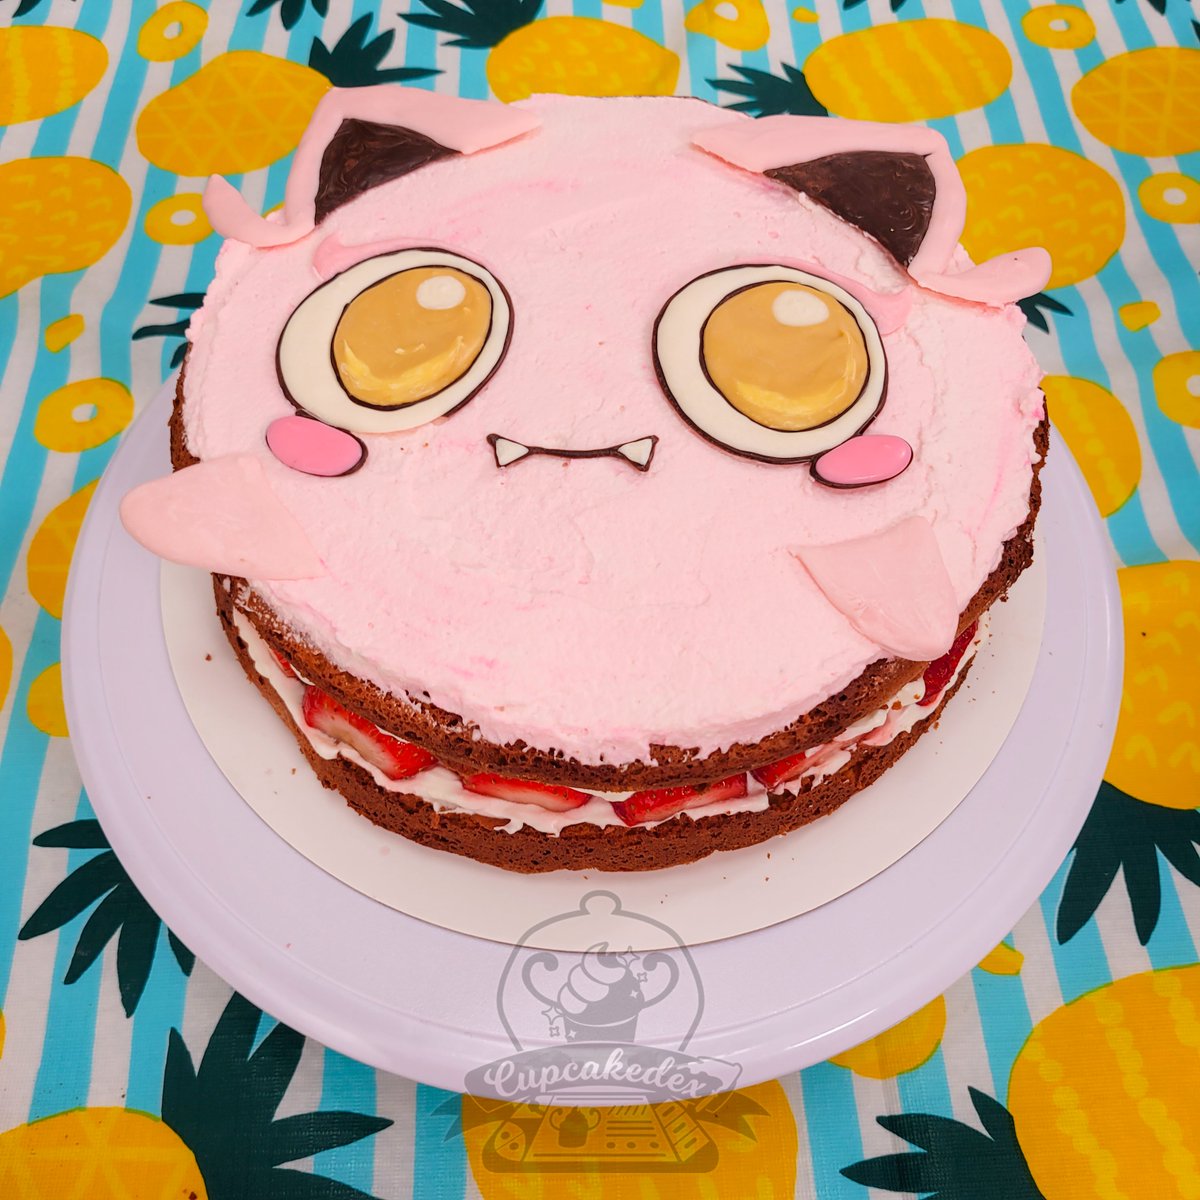 Our Scream Tail strawberry shortcake for our @StJudePLAYLIVE send-off!🍰 #Pokemonfood 

What a month, thanks all for your support in raising over $1000! 🥰

Thank you EasyAsTry, @_eateren_ @DaisyCutterMk2 @whiskeymonstah @LordTocs for the raids, we sent the love to @YuppyPika!